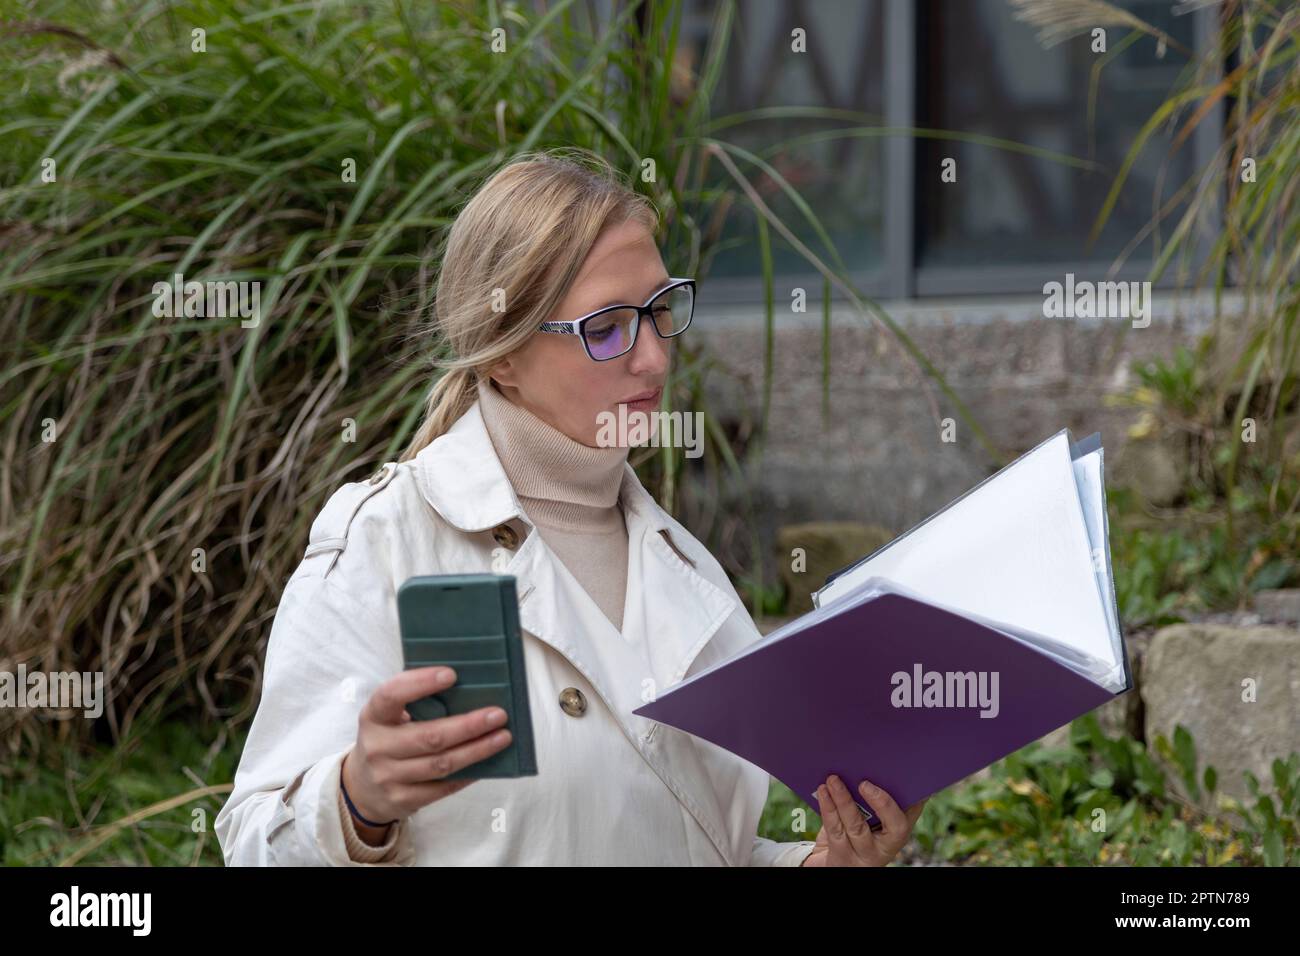 Beautiful matur woman stands near glass building with folder and phone Stock Photo